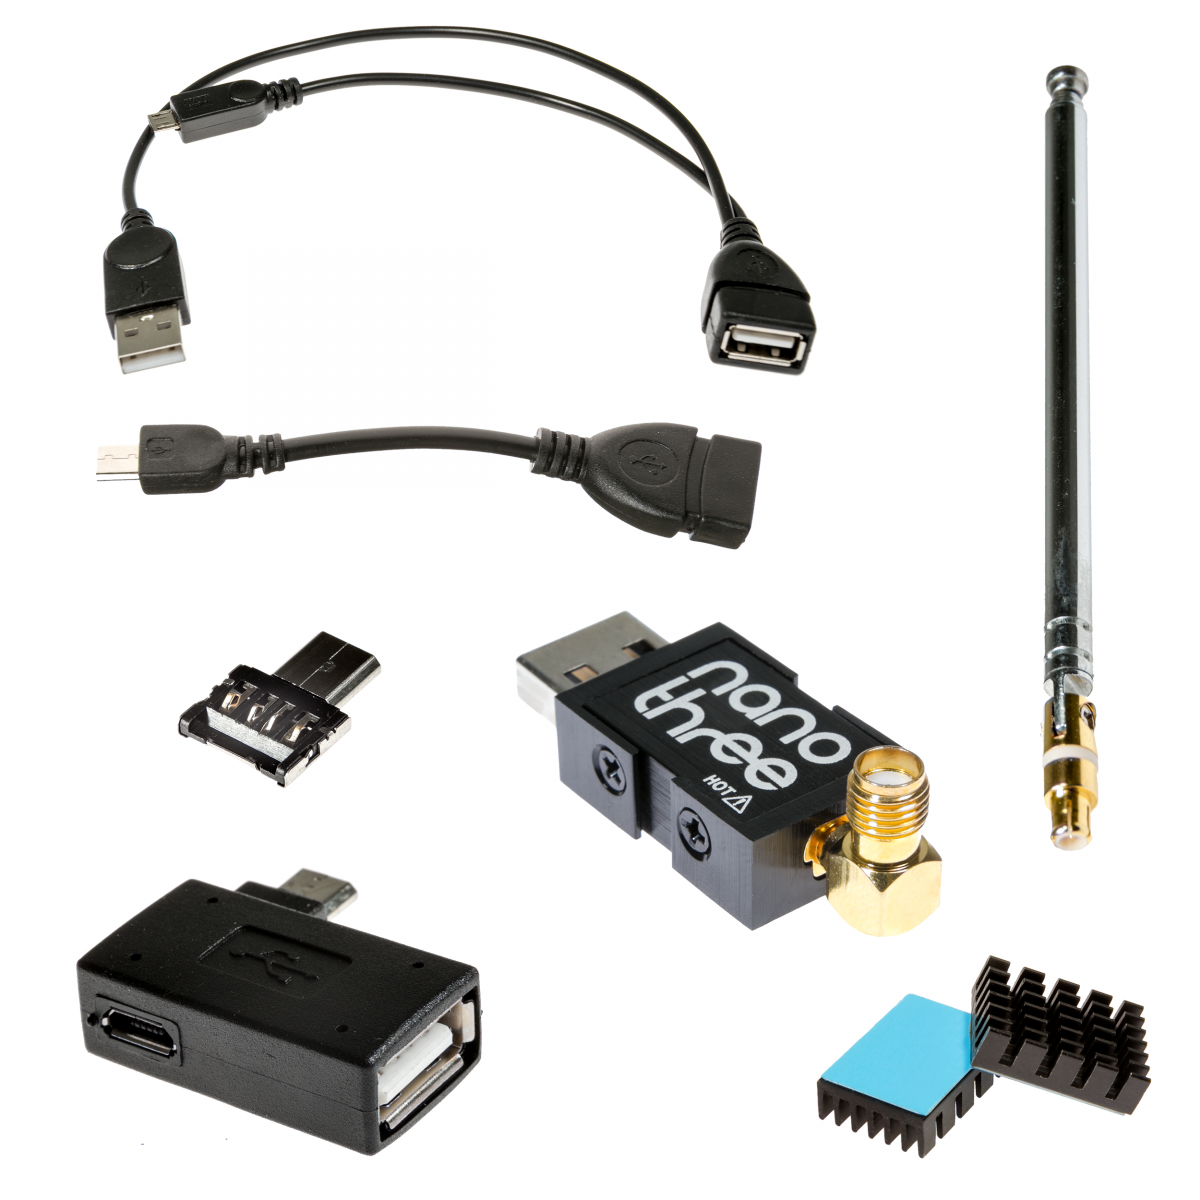 Waterfront Sprede Etableret teori Nooelec - Nooelec NESDR Nano 3 USB OTG Bundle - Tiny RTL-SDR USB On-The-Go  Bundle for MicroUSB Devices - NESDR RTL-SDR Receivers - SDR Receivers -  Software Defined Radio